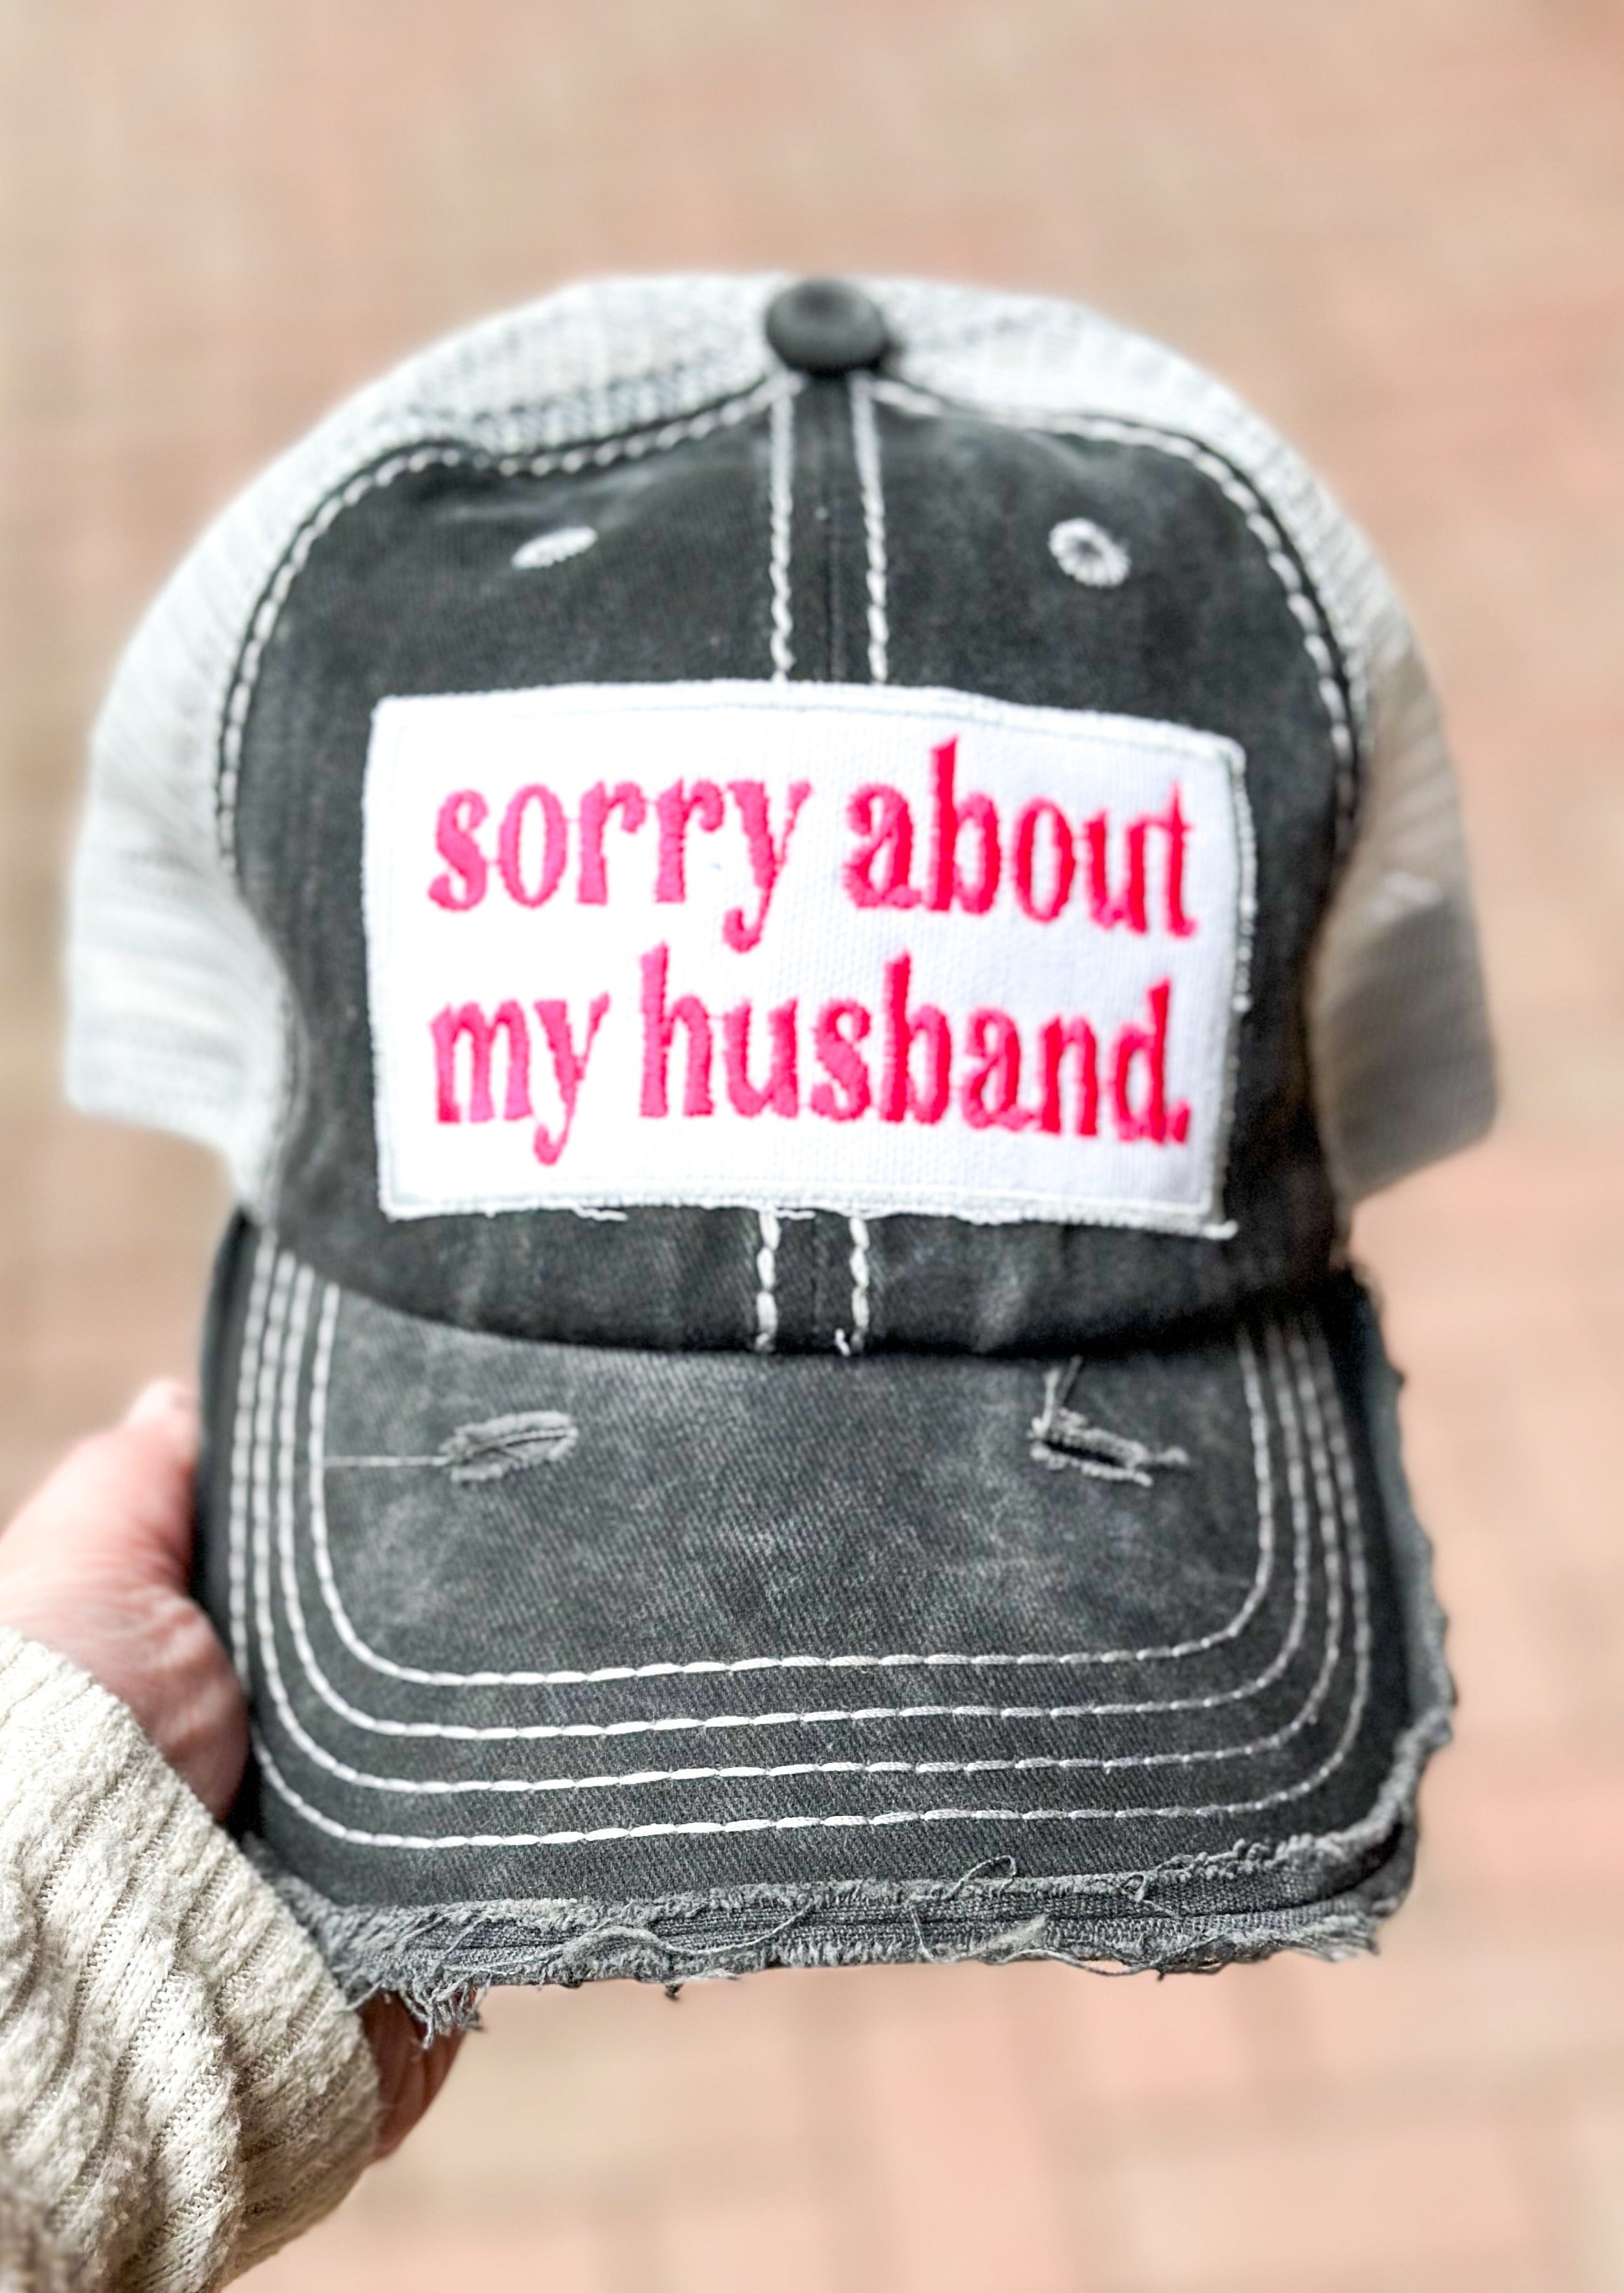 sorry about my husband embroidered patch in hot pink on charcoal gray trucker hat.